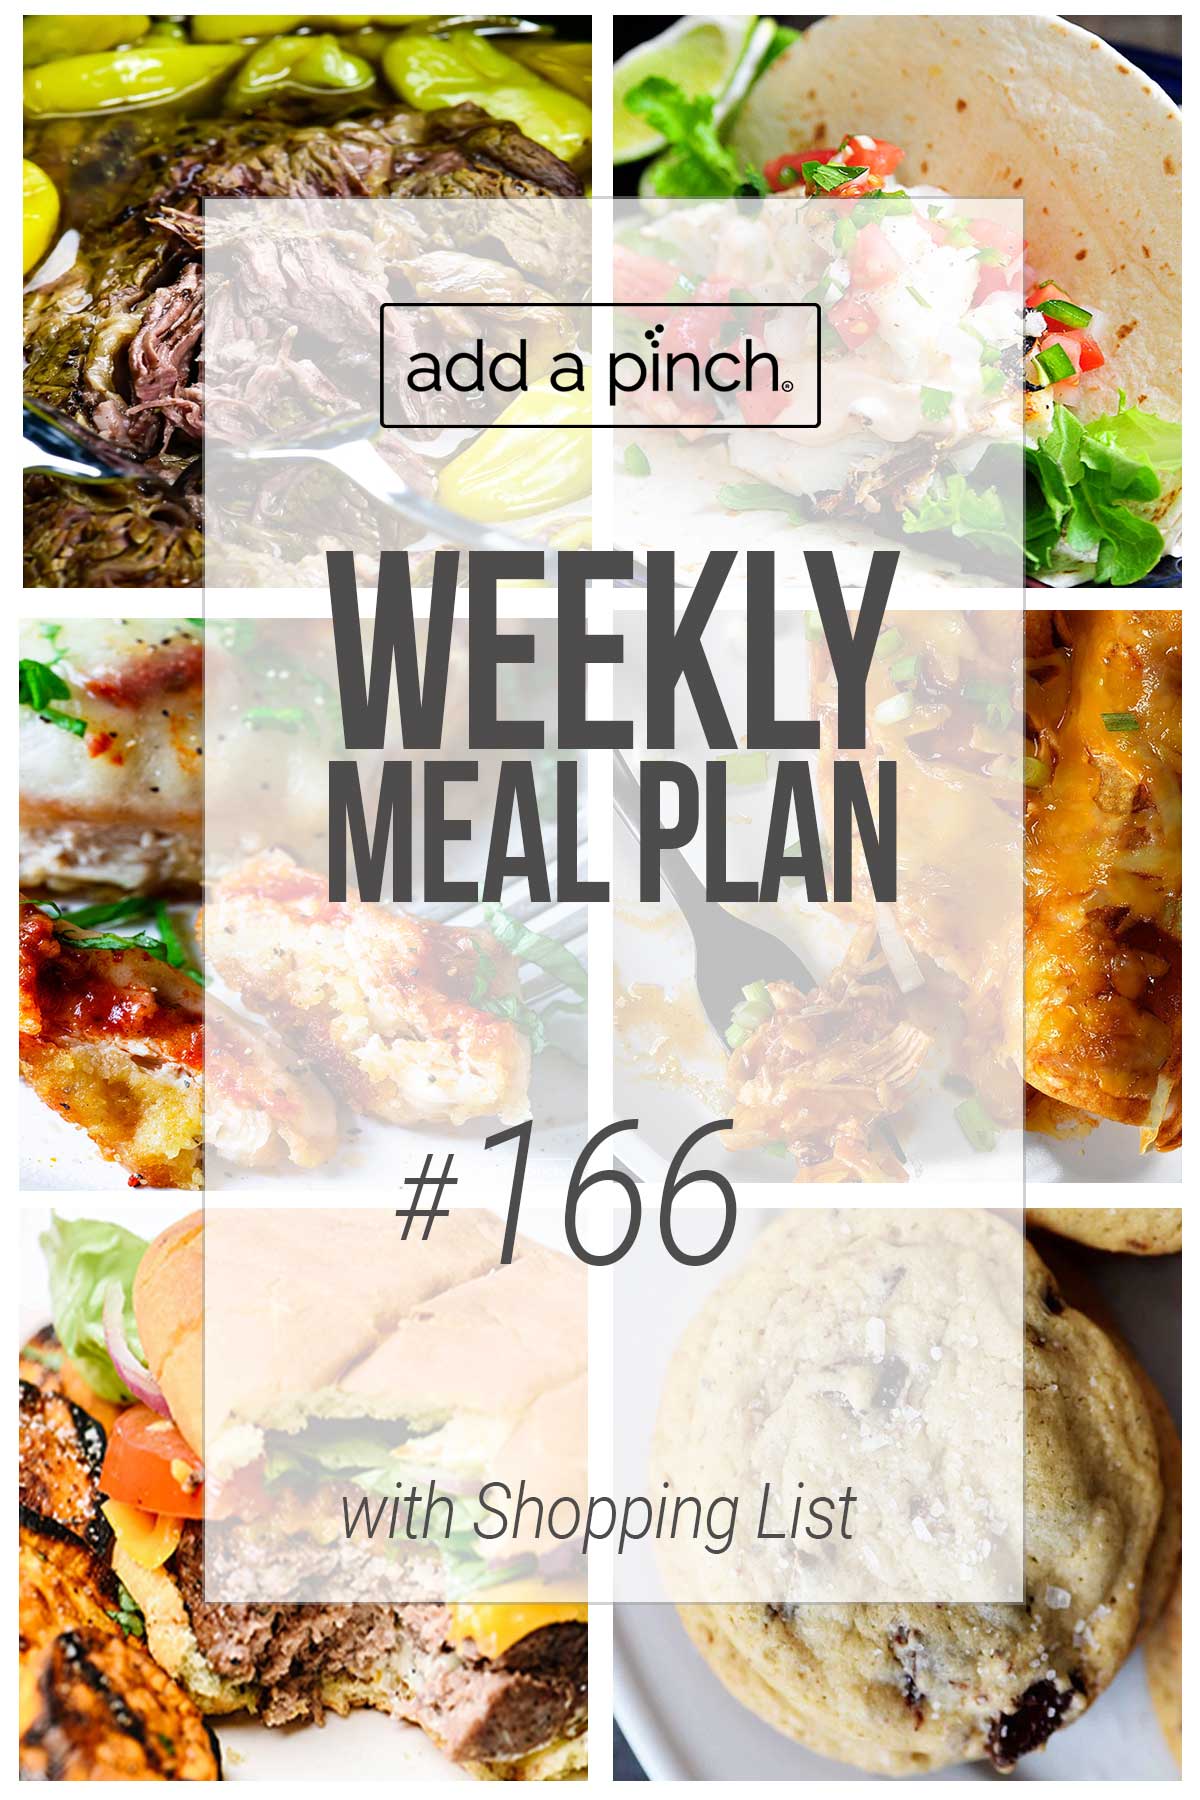 Cover image for the Weekly Meal Plan #166 on addapinch.com